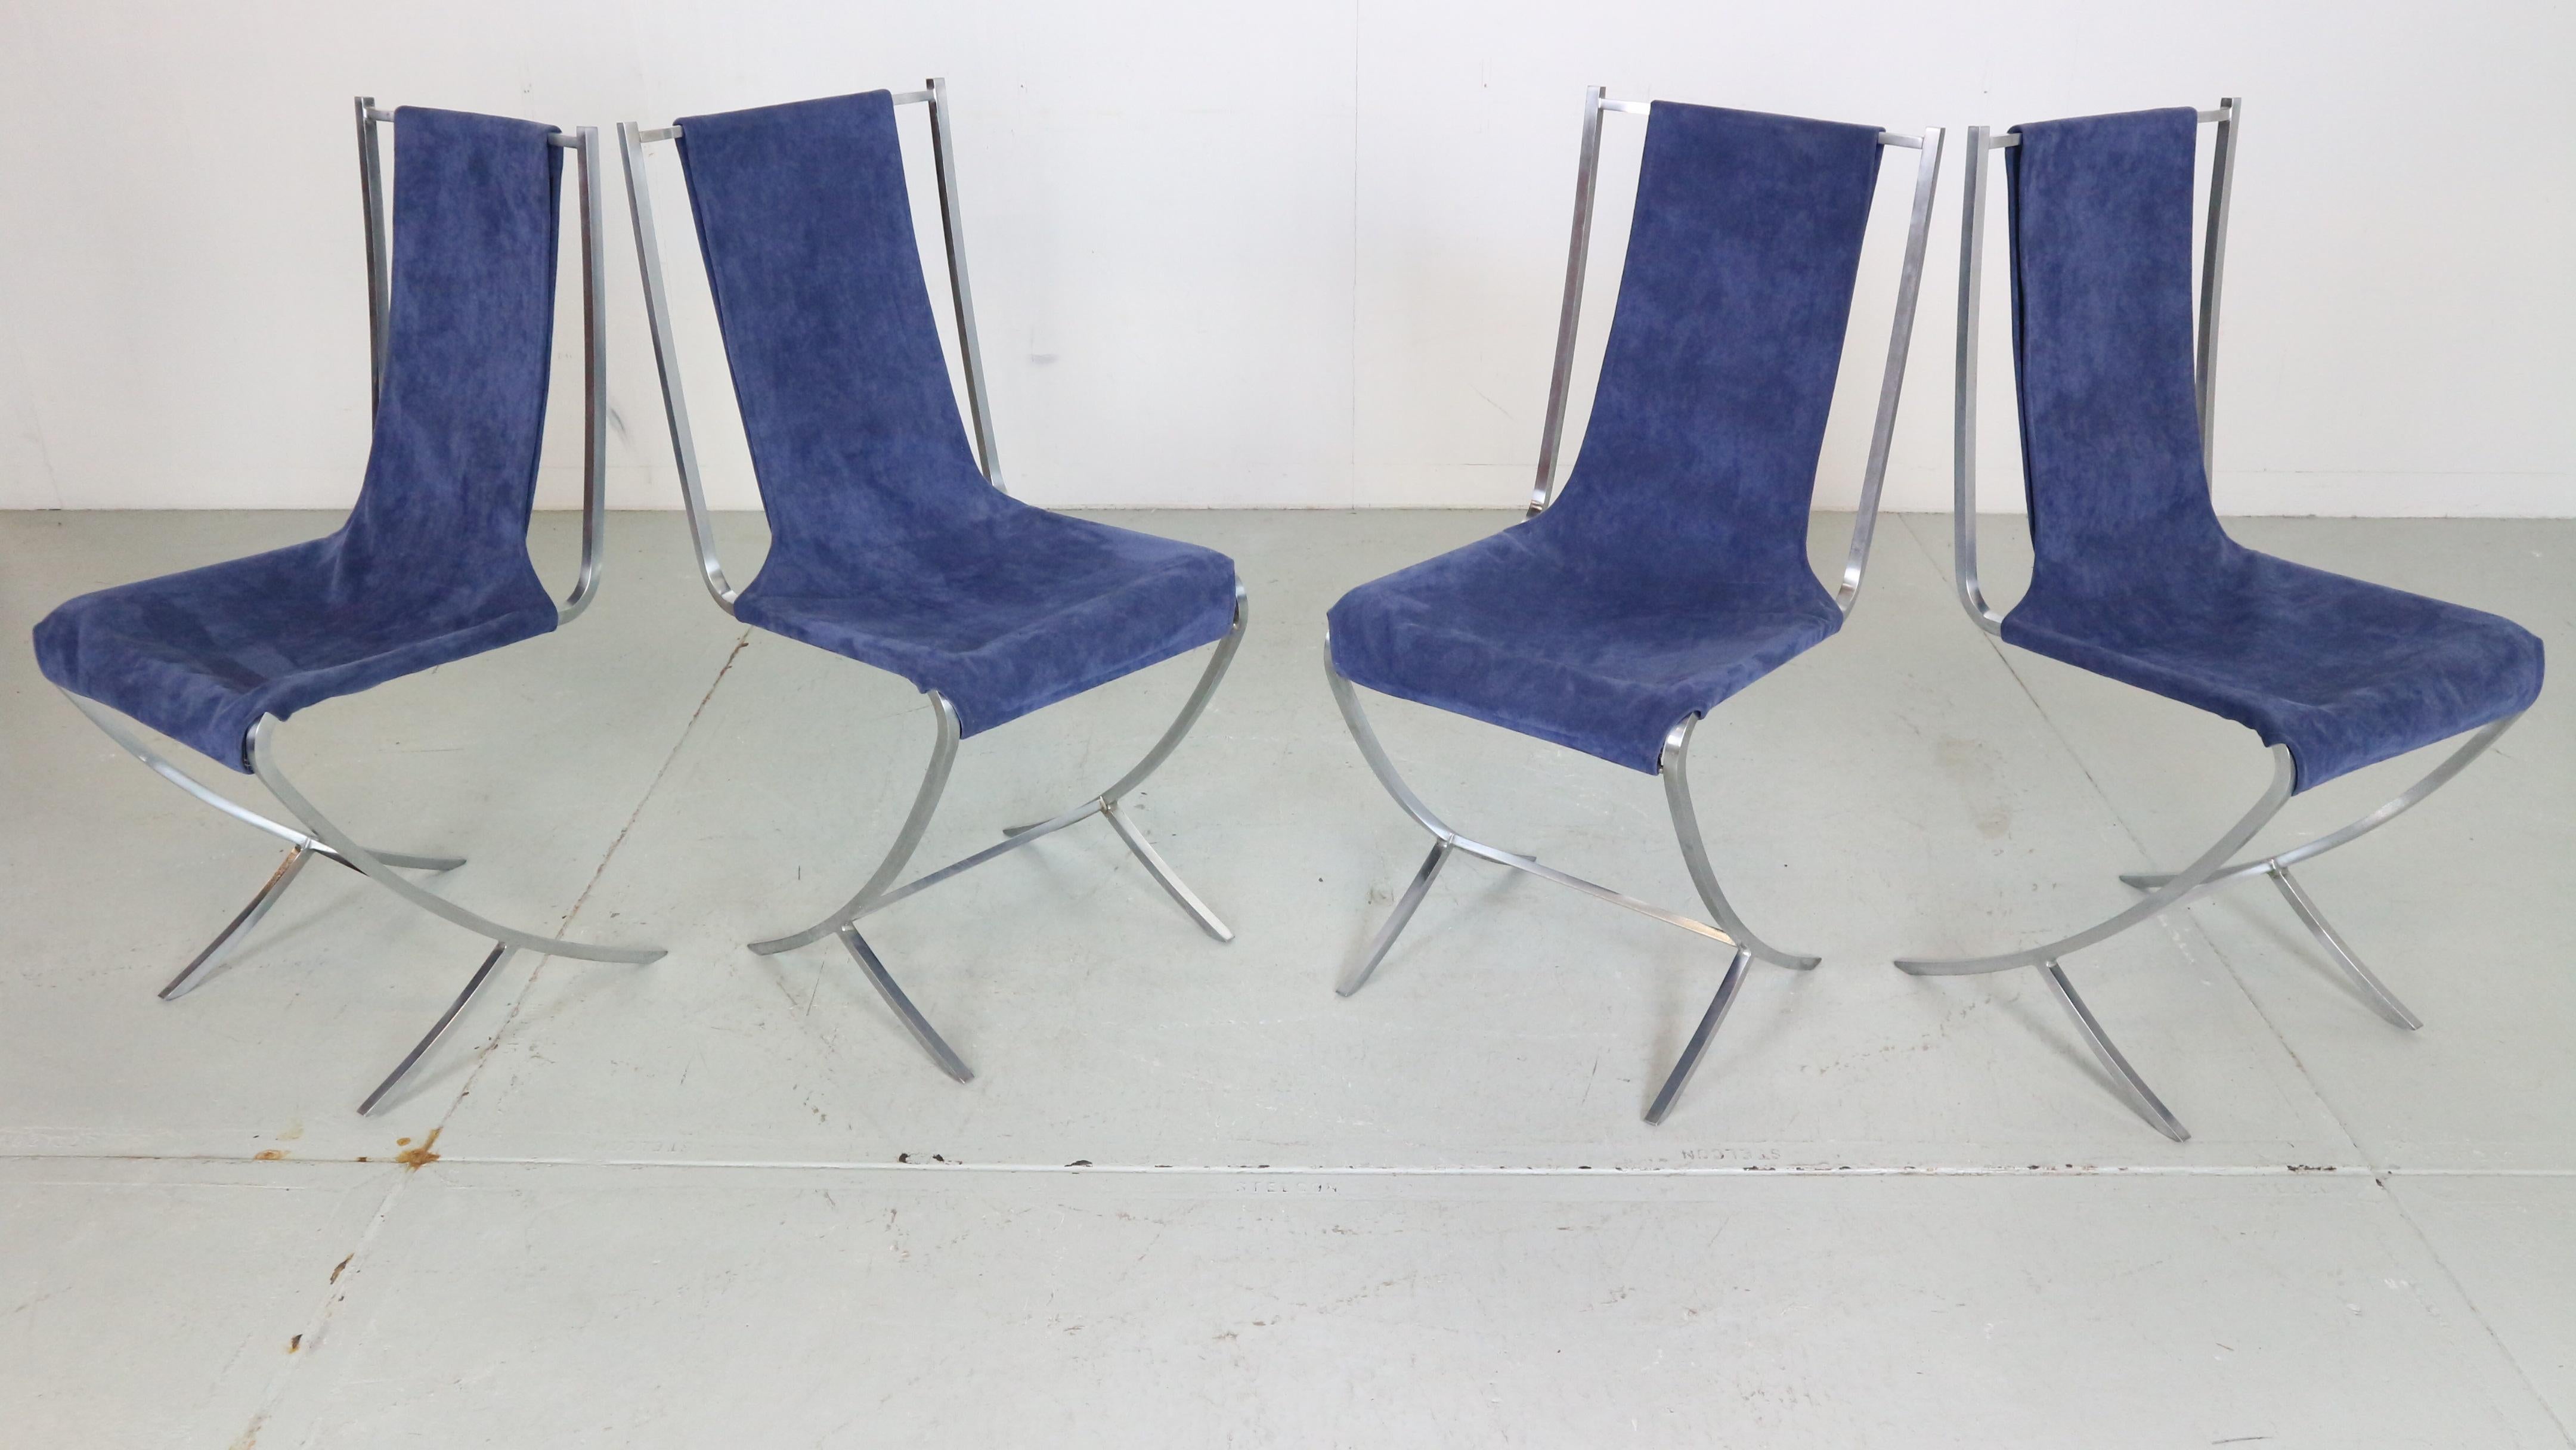 This set of 4 chairs was created by French Avant Garde designer Pierre Cardin for well-known interior design firm Maison Jansen, 1970's France.

Lounge on extravagant blue velvet, suspended across a sturdy, but artfully imagined structure made of